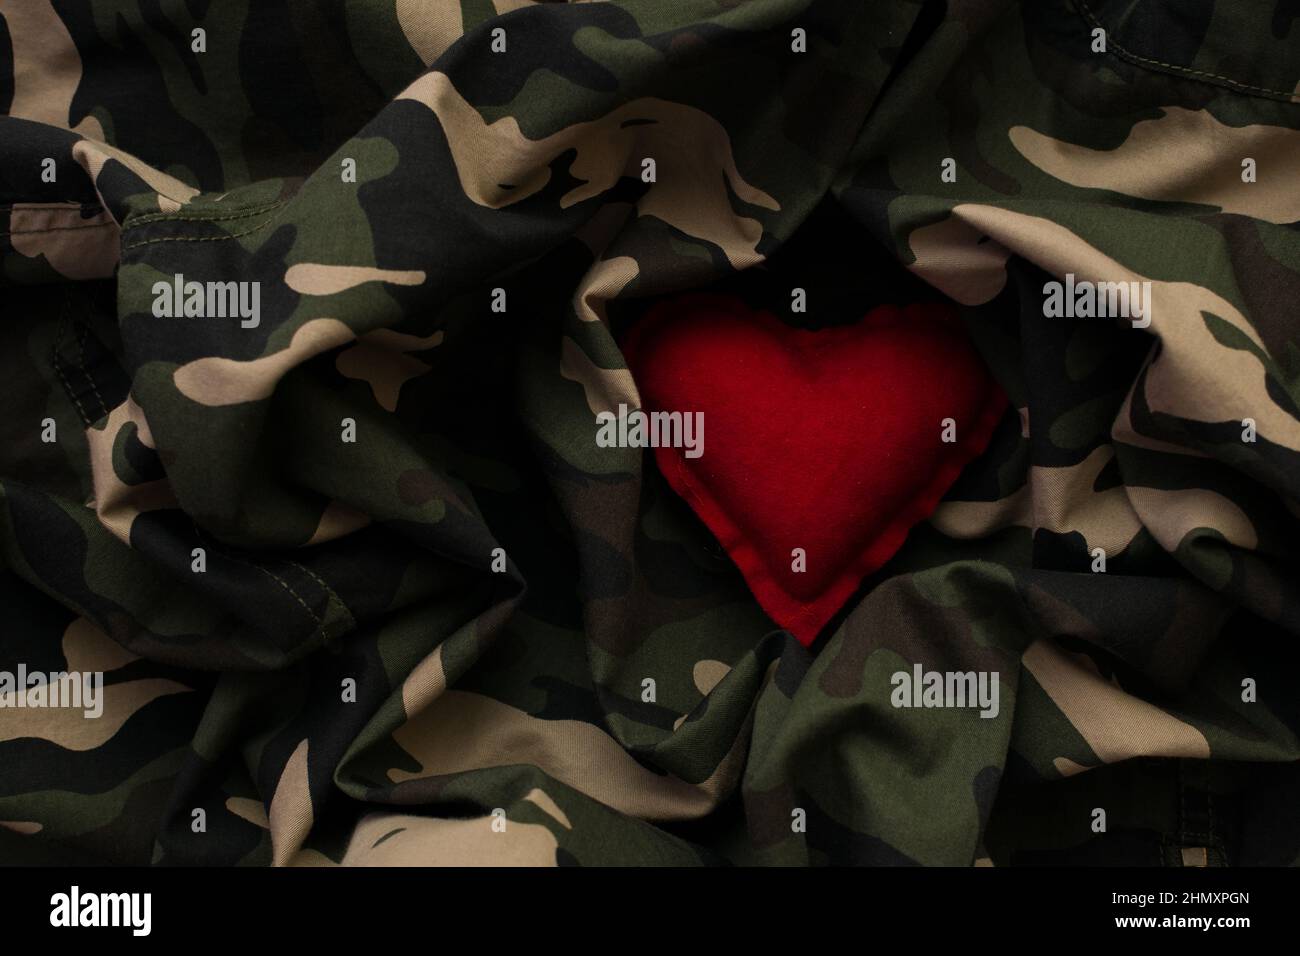 Red heart on military camouflage uniform. Love and war concept Stock Photo